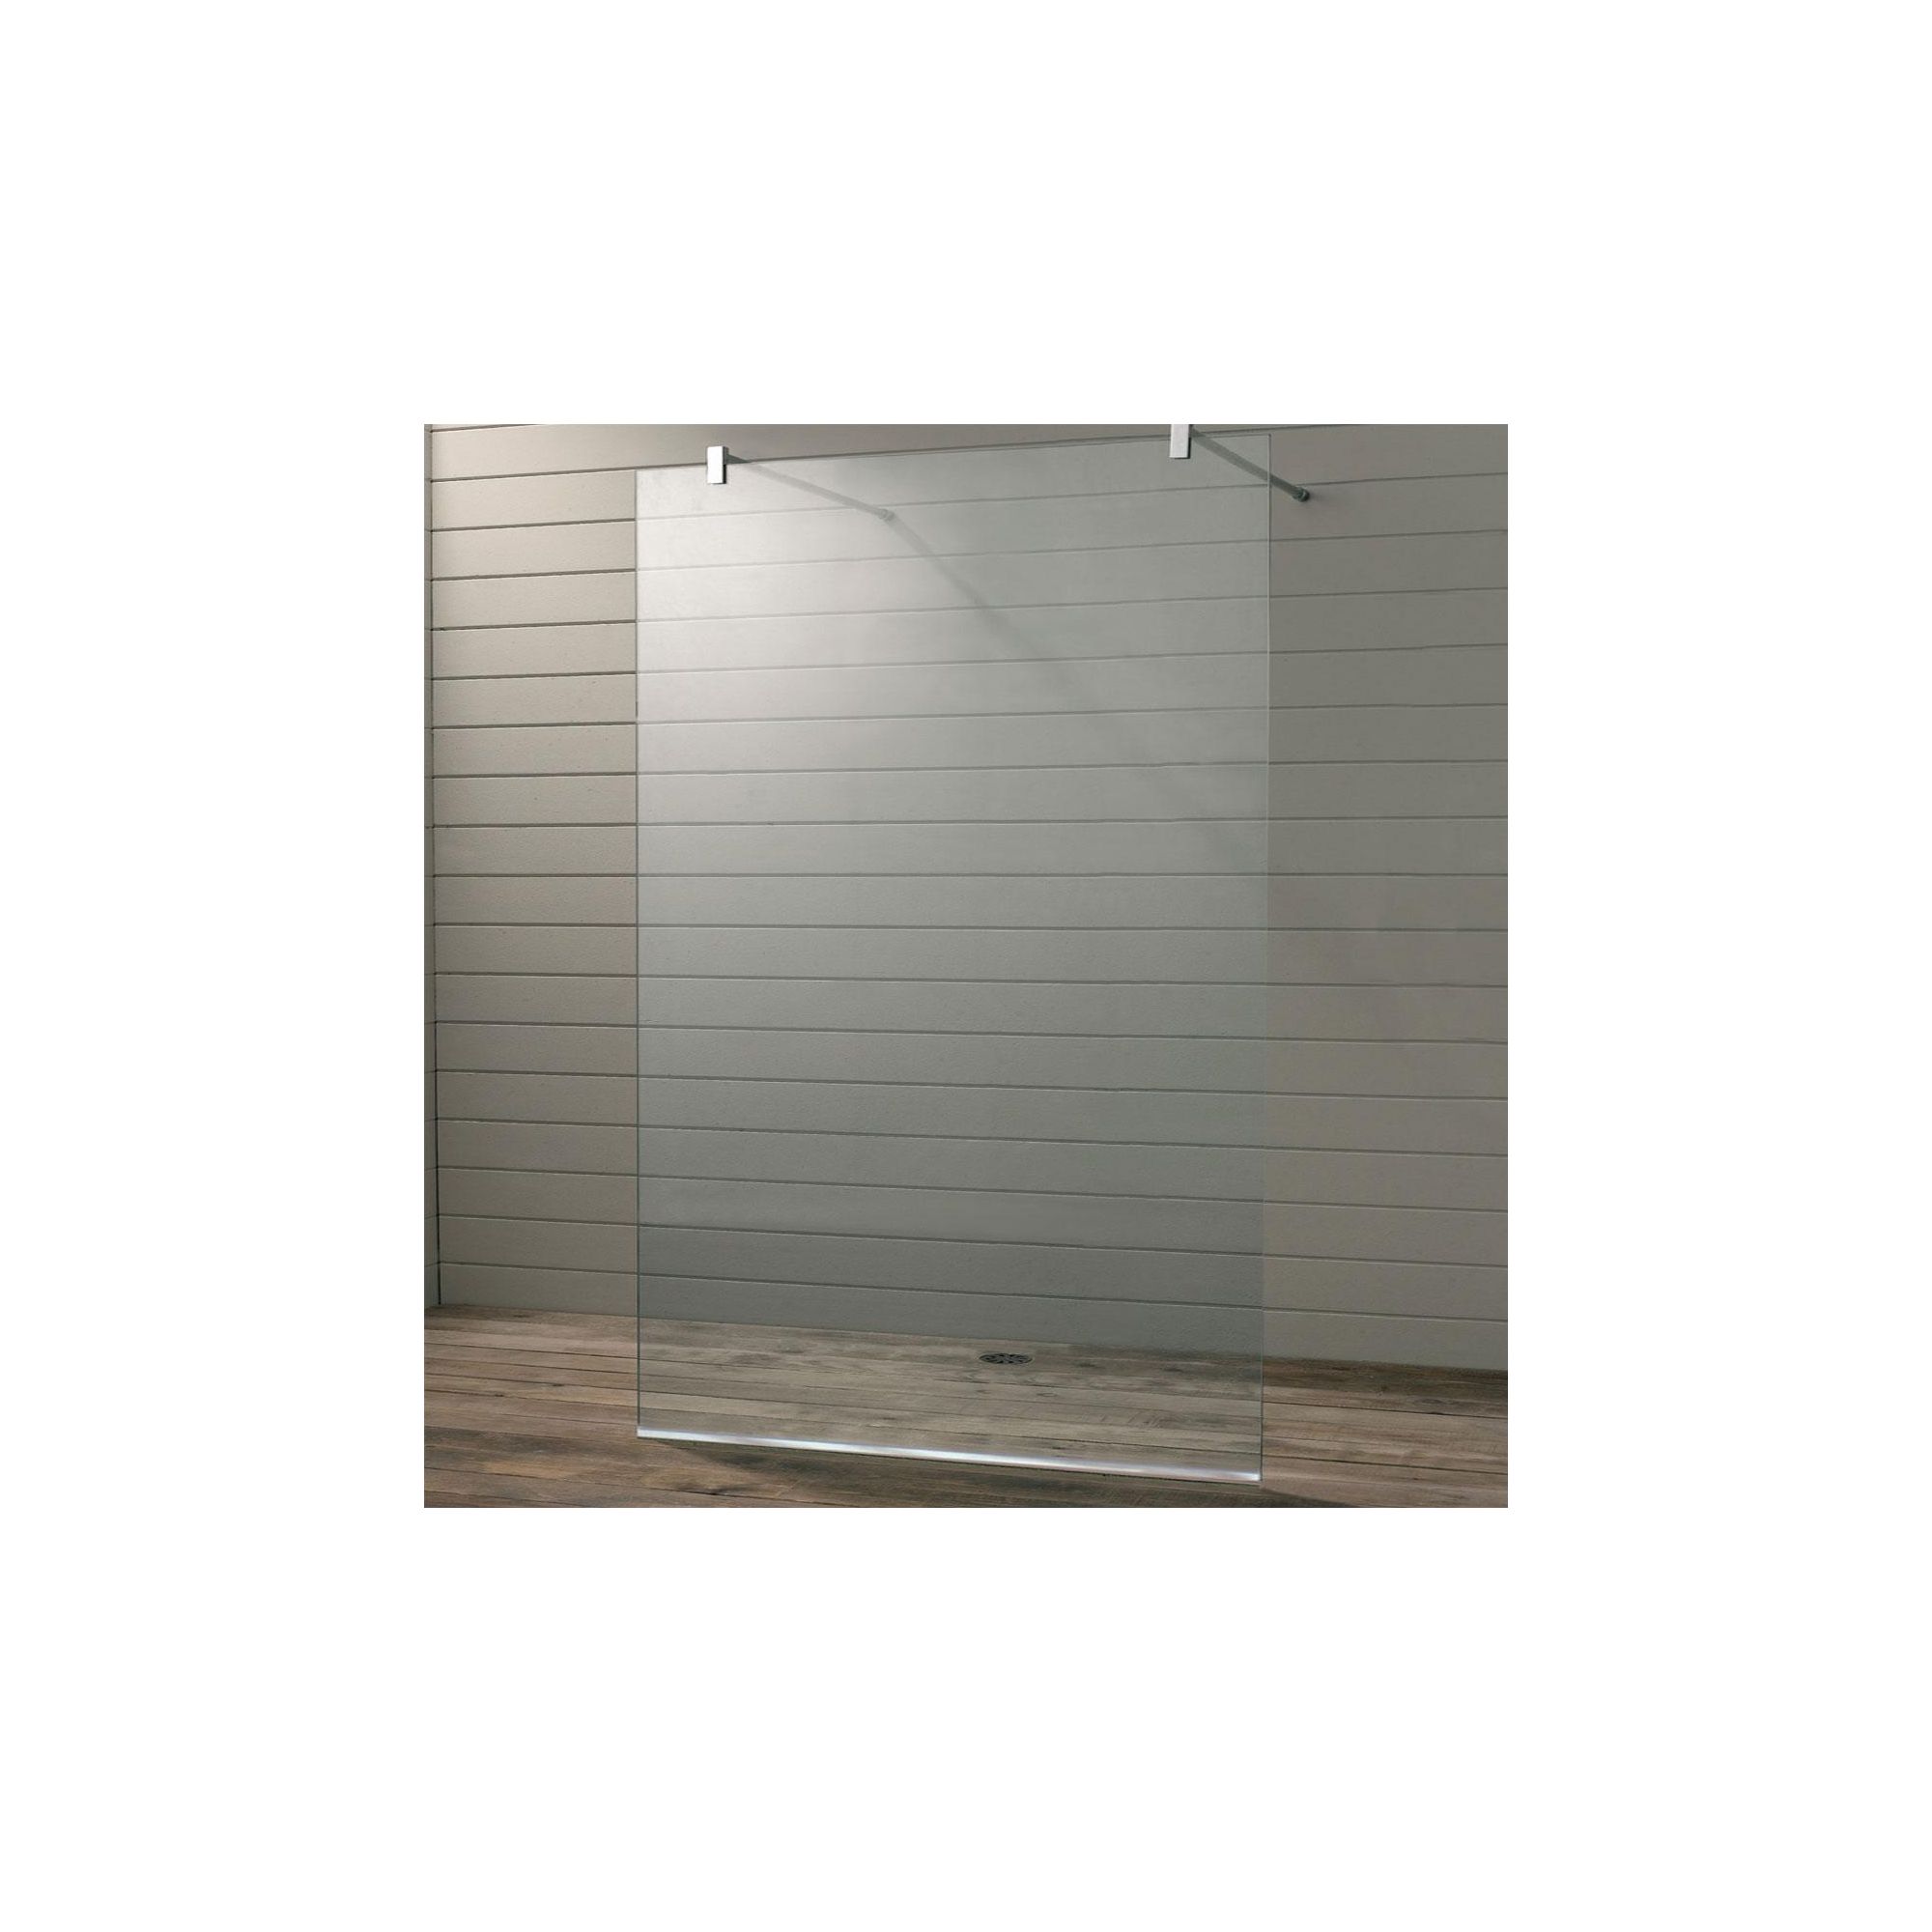 Duchy Premium Wet Room Glass Shower Panel, 1400mm x 800mm, 10mm Glass, Low Profile Tray at Tesco Direct